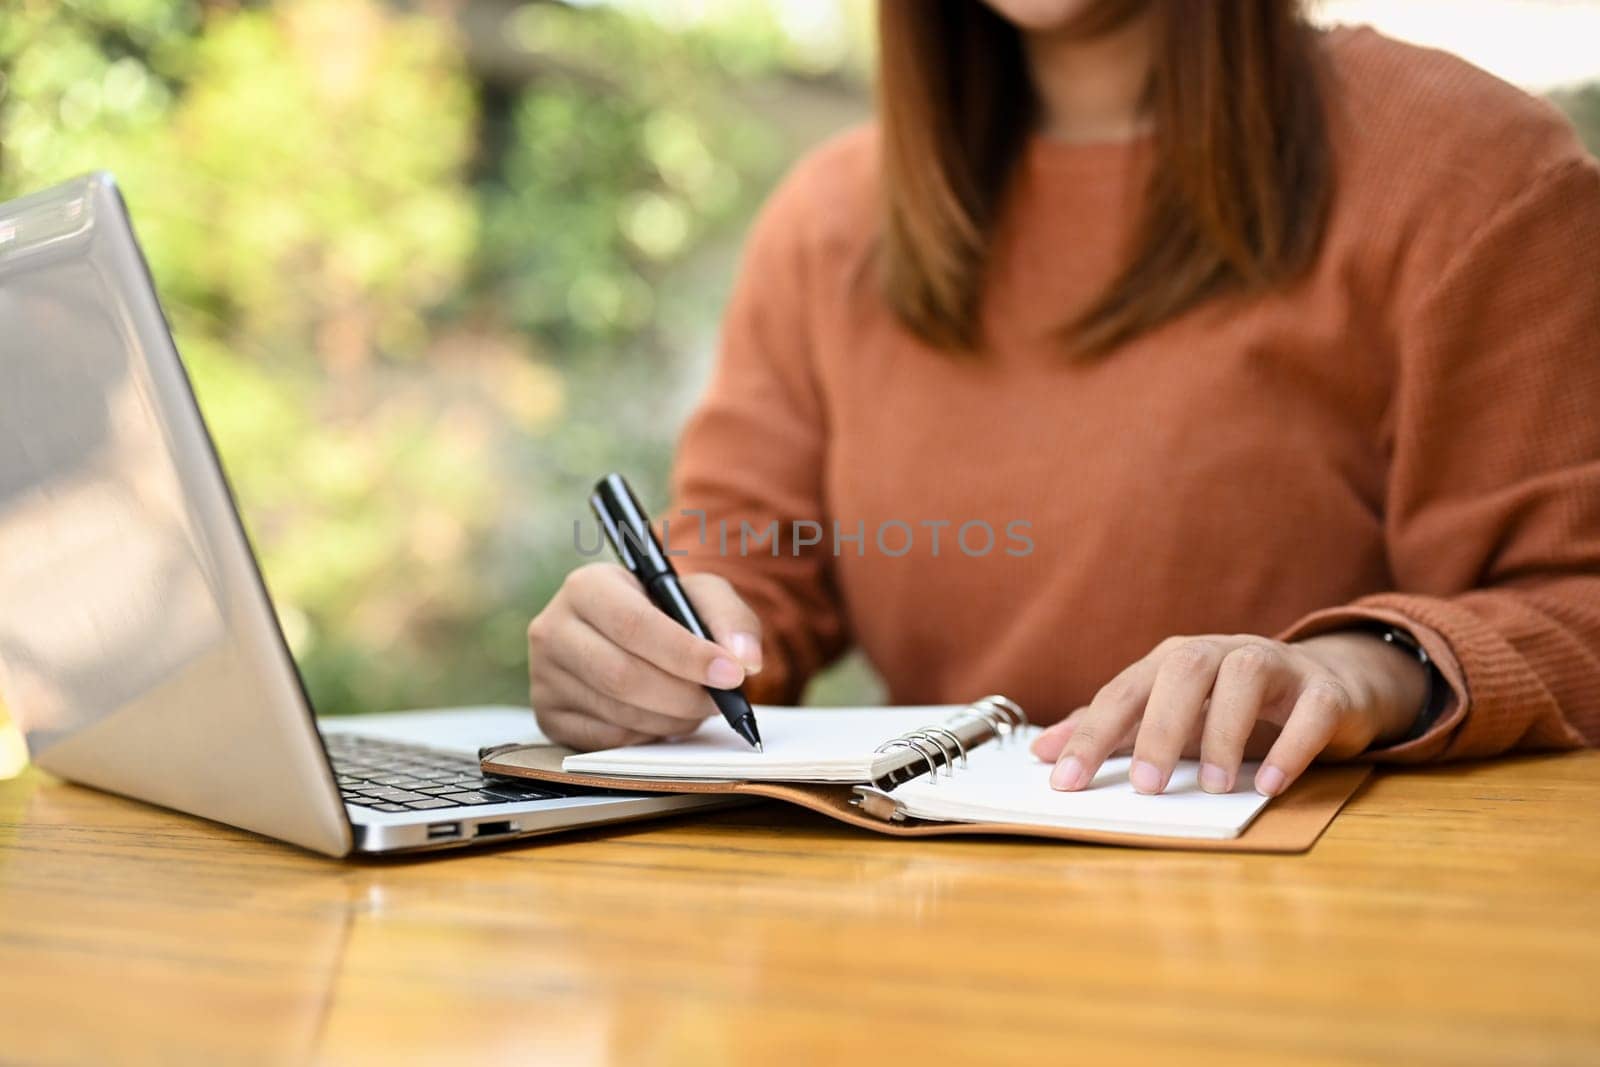 Female freelancer using laptop and writing notes in personal daily planner, planning workday by prathanchorruangsak